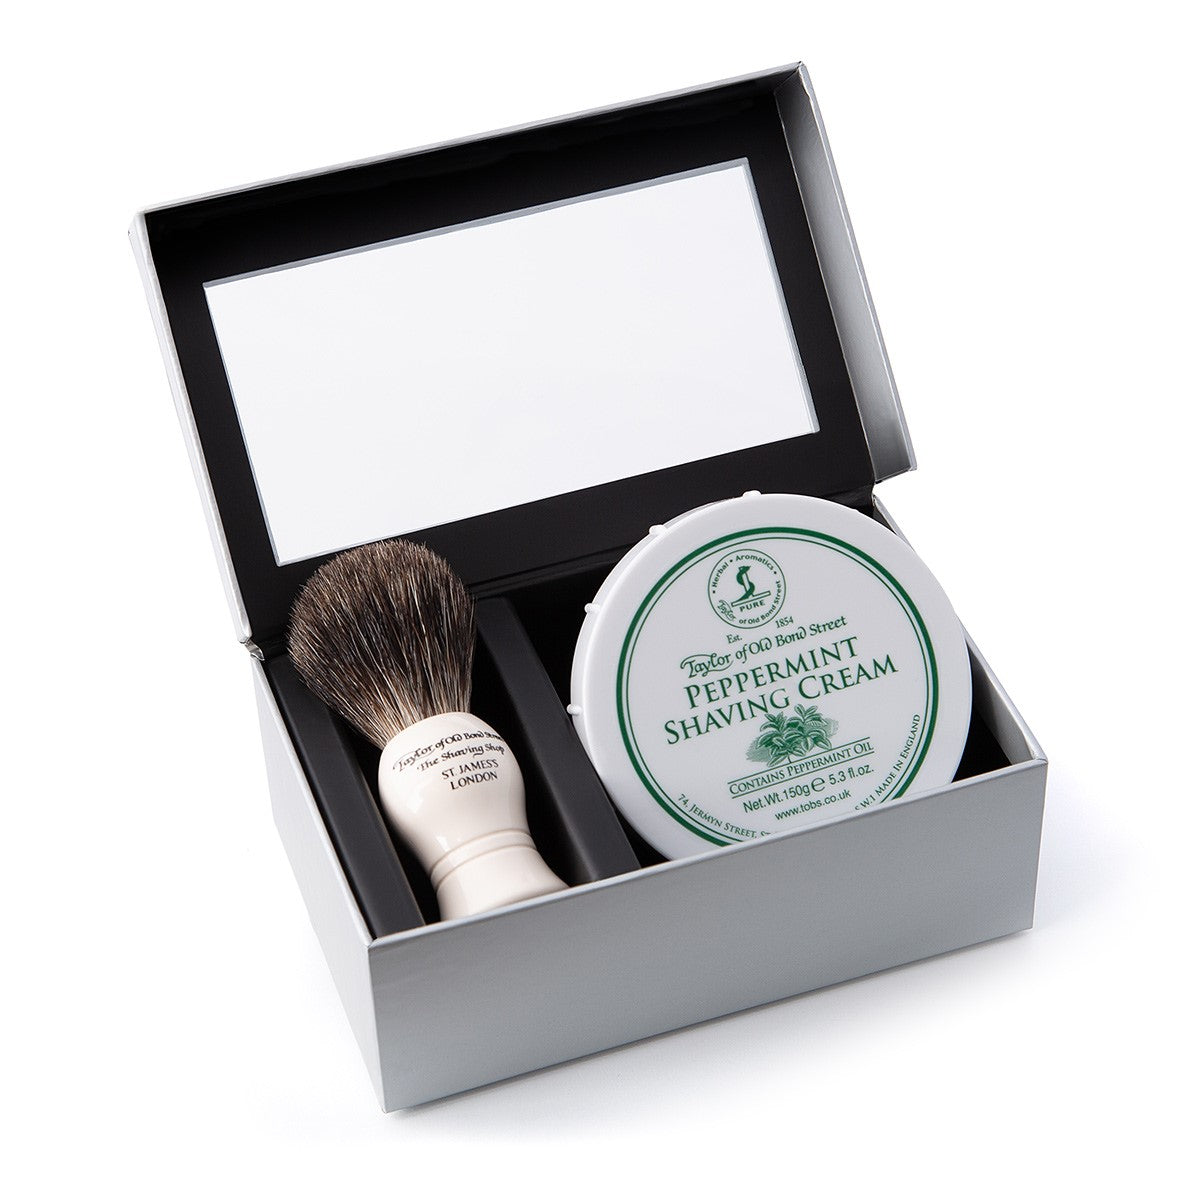 Grooming Sets | Grooming Gift Sets | Taylor Old Bond Street - Taylor of Old  Bond Street | Handseifen